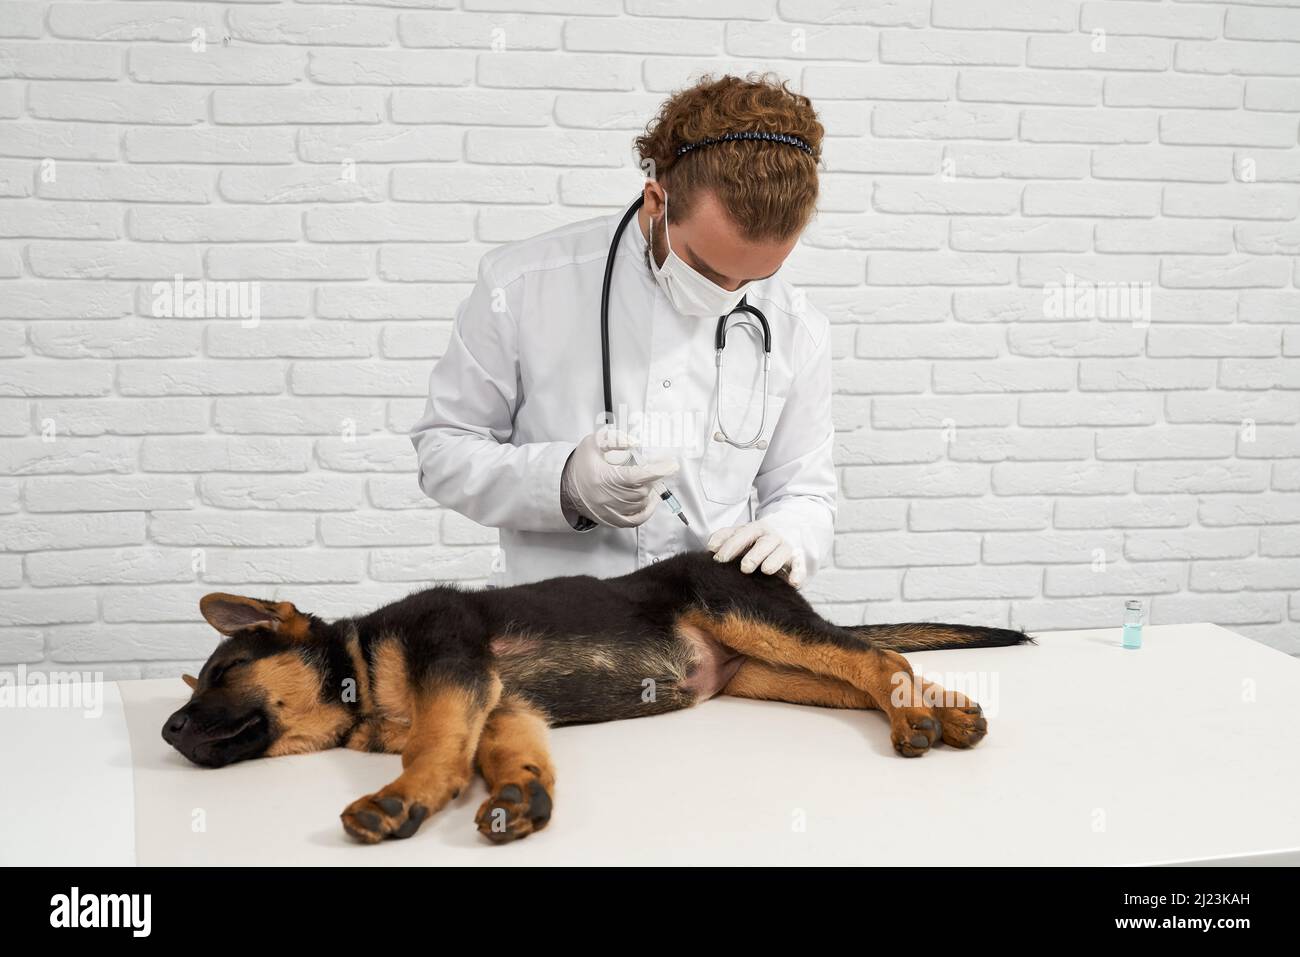 Front view of German Shepherd being injected by vet in vet clinic. Dog lying on side in narcosis, doctor in lab coat, gloves and mask holding syringe, Concept of pets treating. Stock Photo